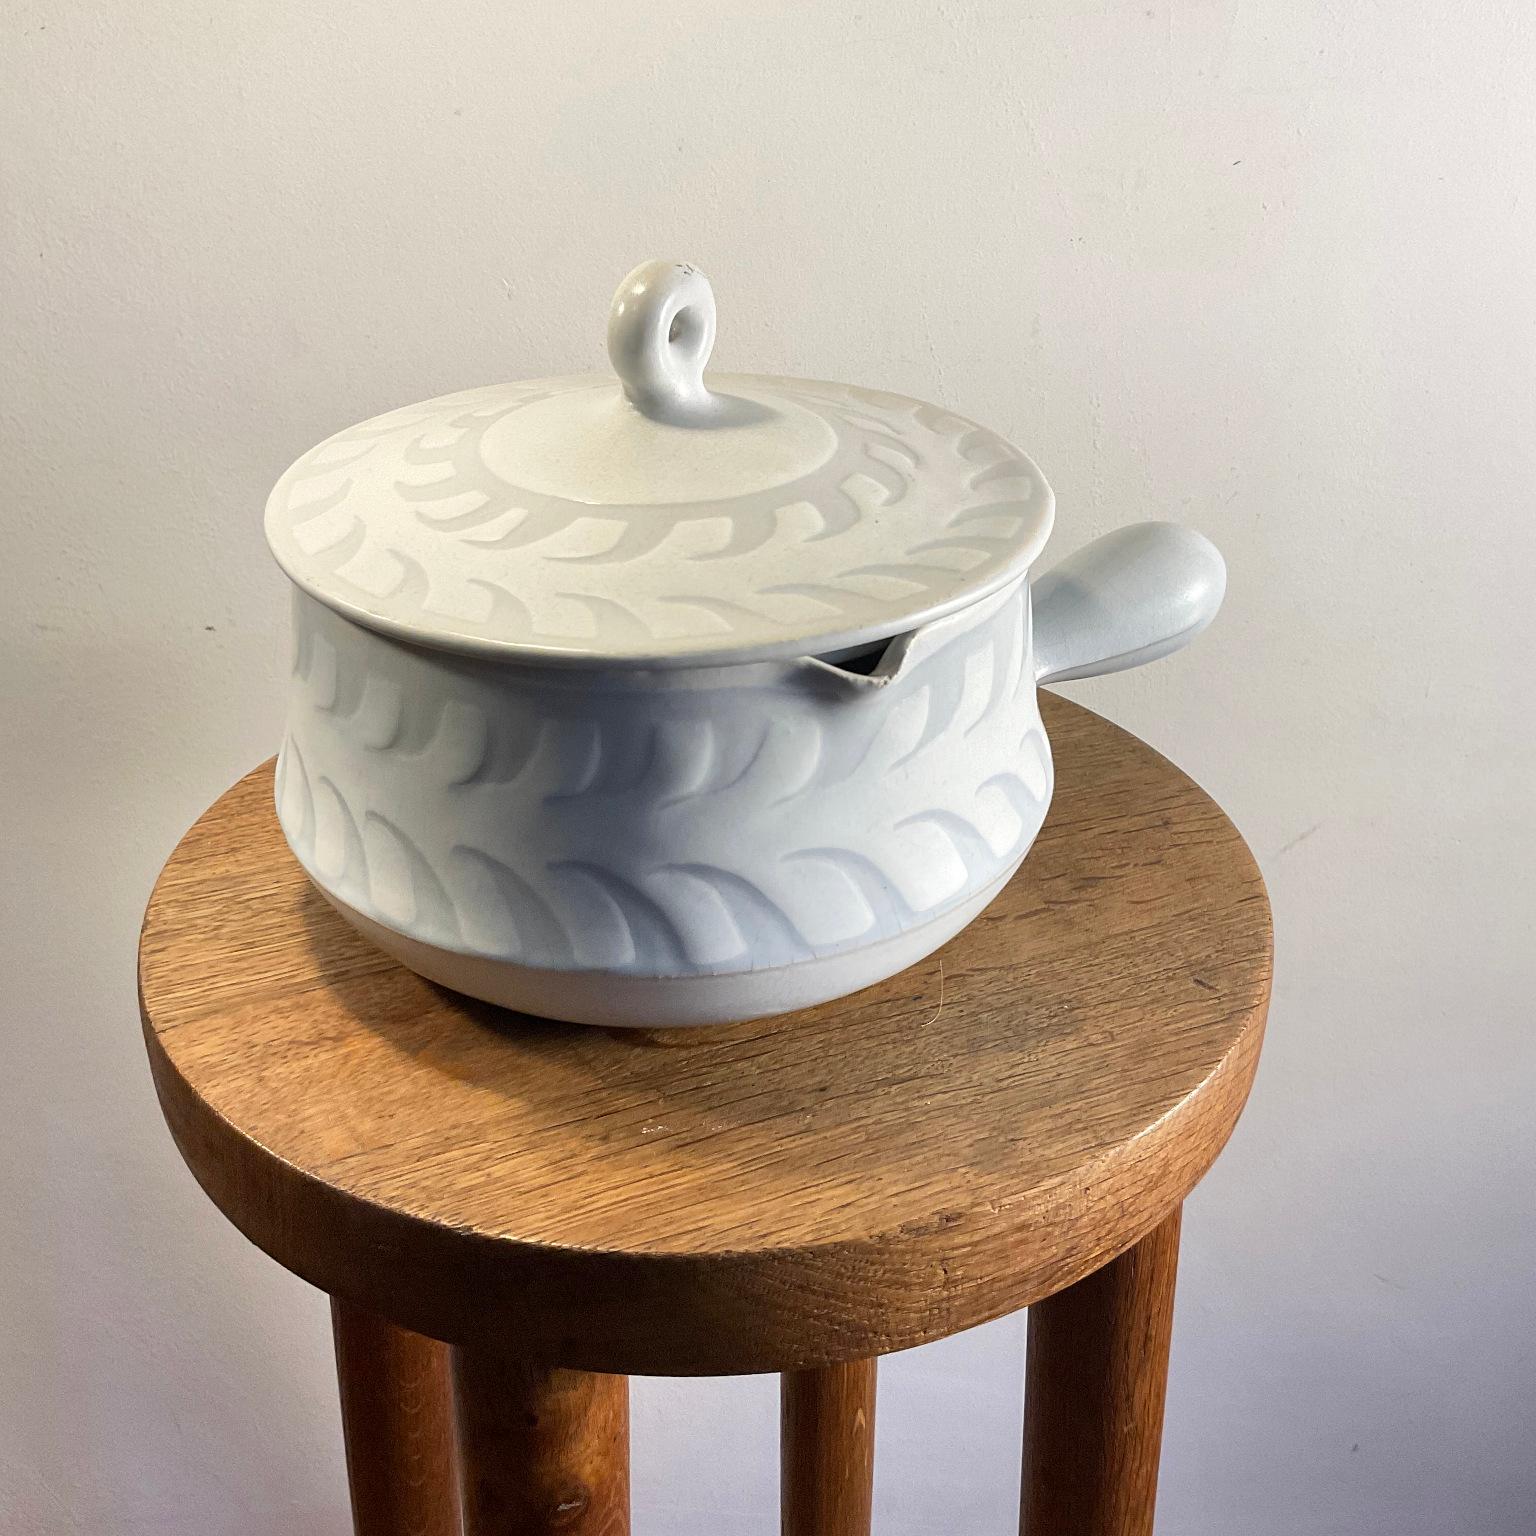 Ceramic tureen with handle and lid from the 1960s designed by Roger Capron decorated with a white enamel pattern on a blue-gray background.
33cm Diameter with handle 
Container diameter 20 cm
18cm Height